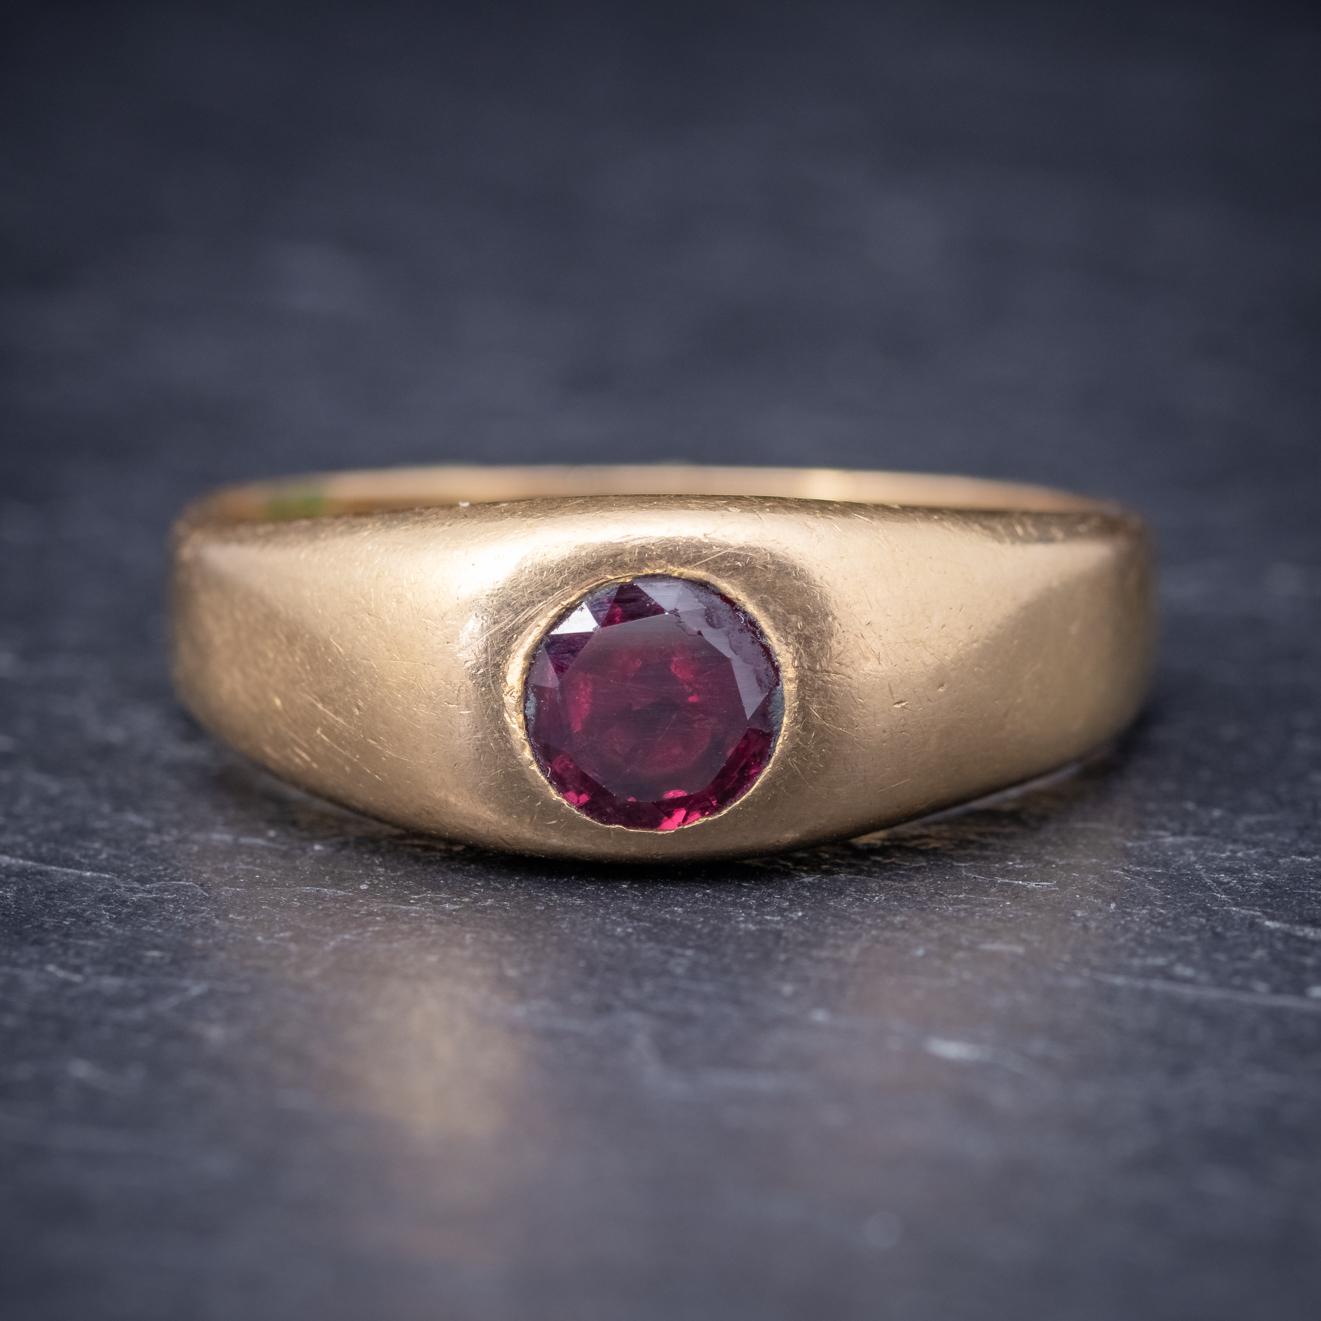 A grand antique Victorian ring set with a deep red Ruby in the centre which is 0.60ct. The ring is a lovely weight and modelled in solid 18ct Yellow Gold complimenting the Ruby beautifully. This would suit either sex and has a lovely minimalist